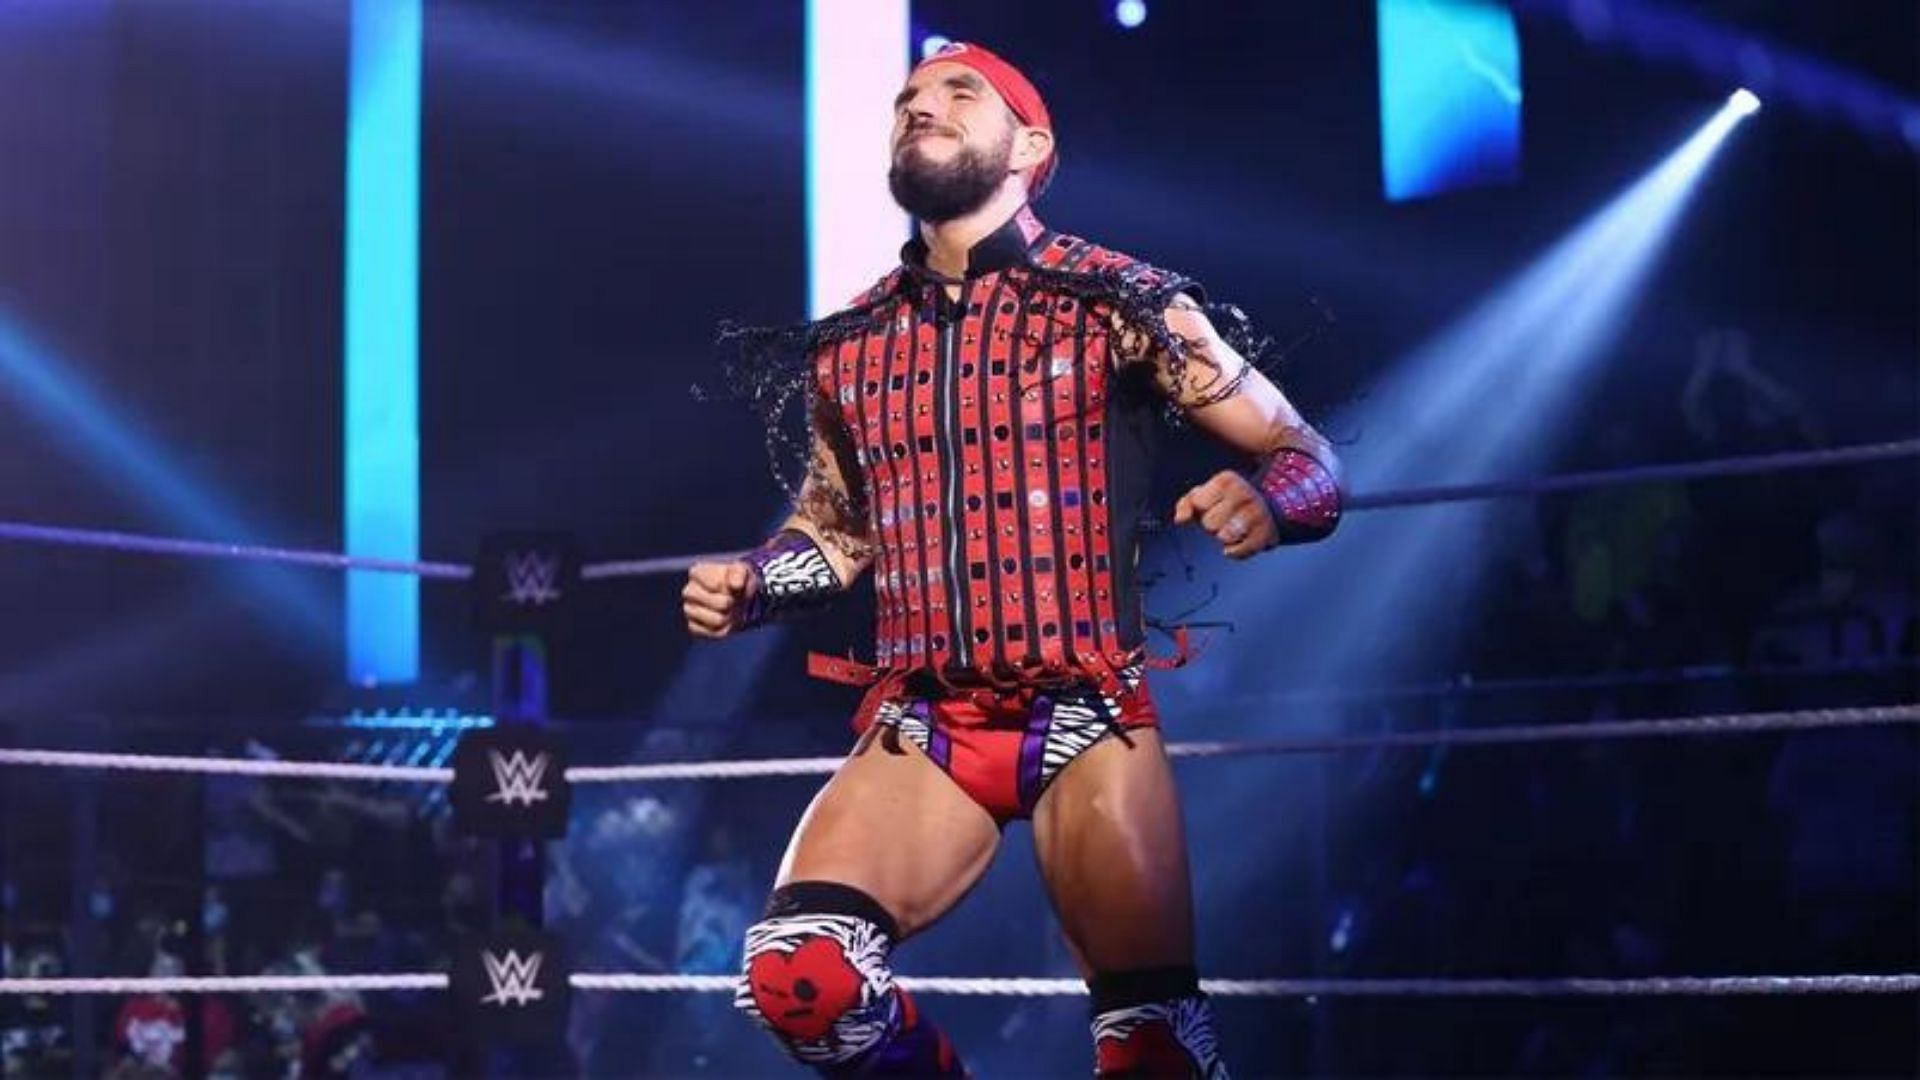 Johnny Gargano at an NXT event in 2021